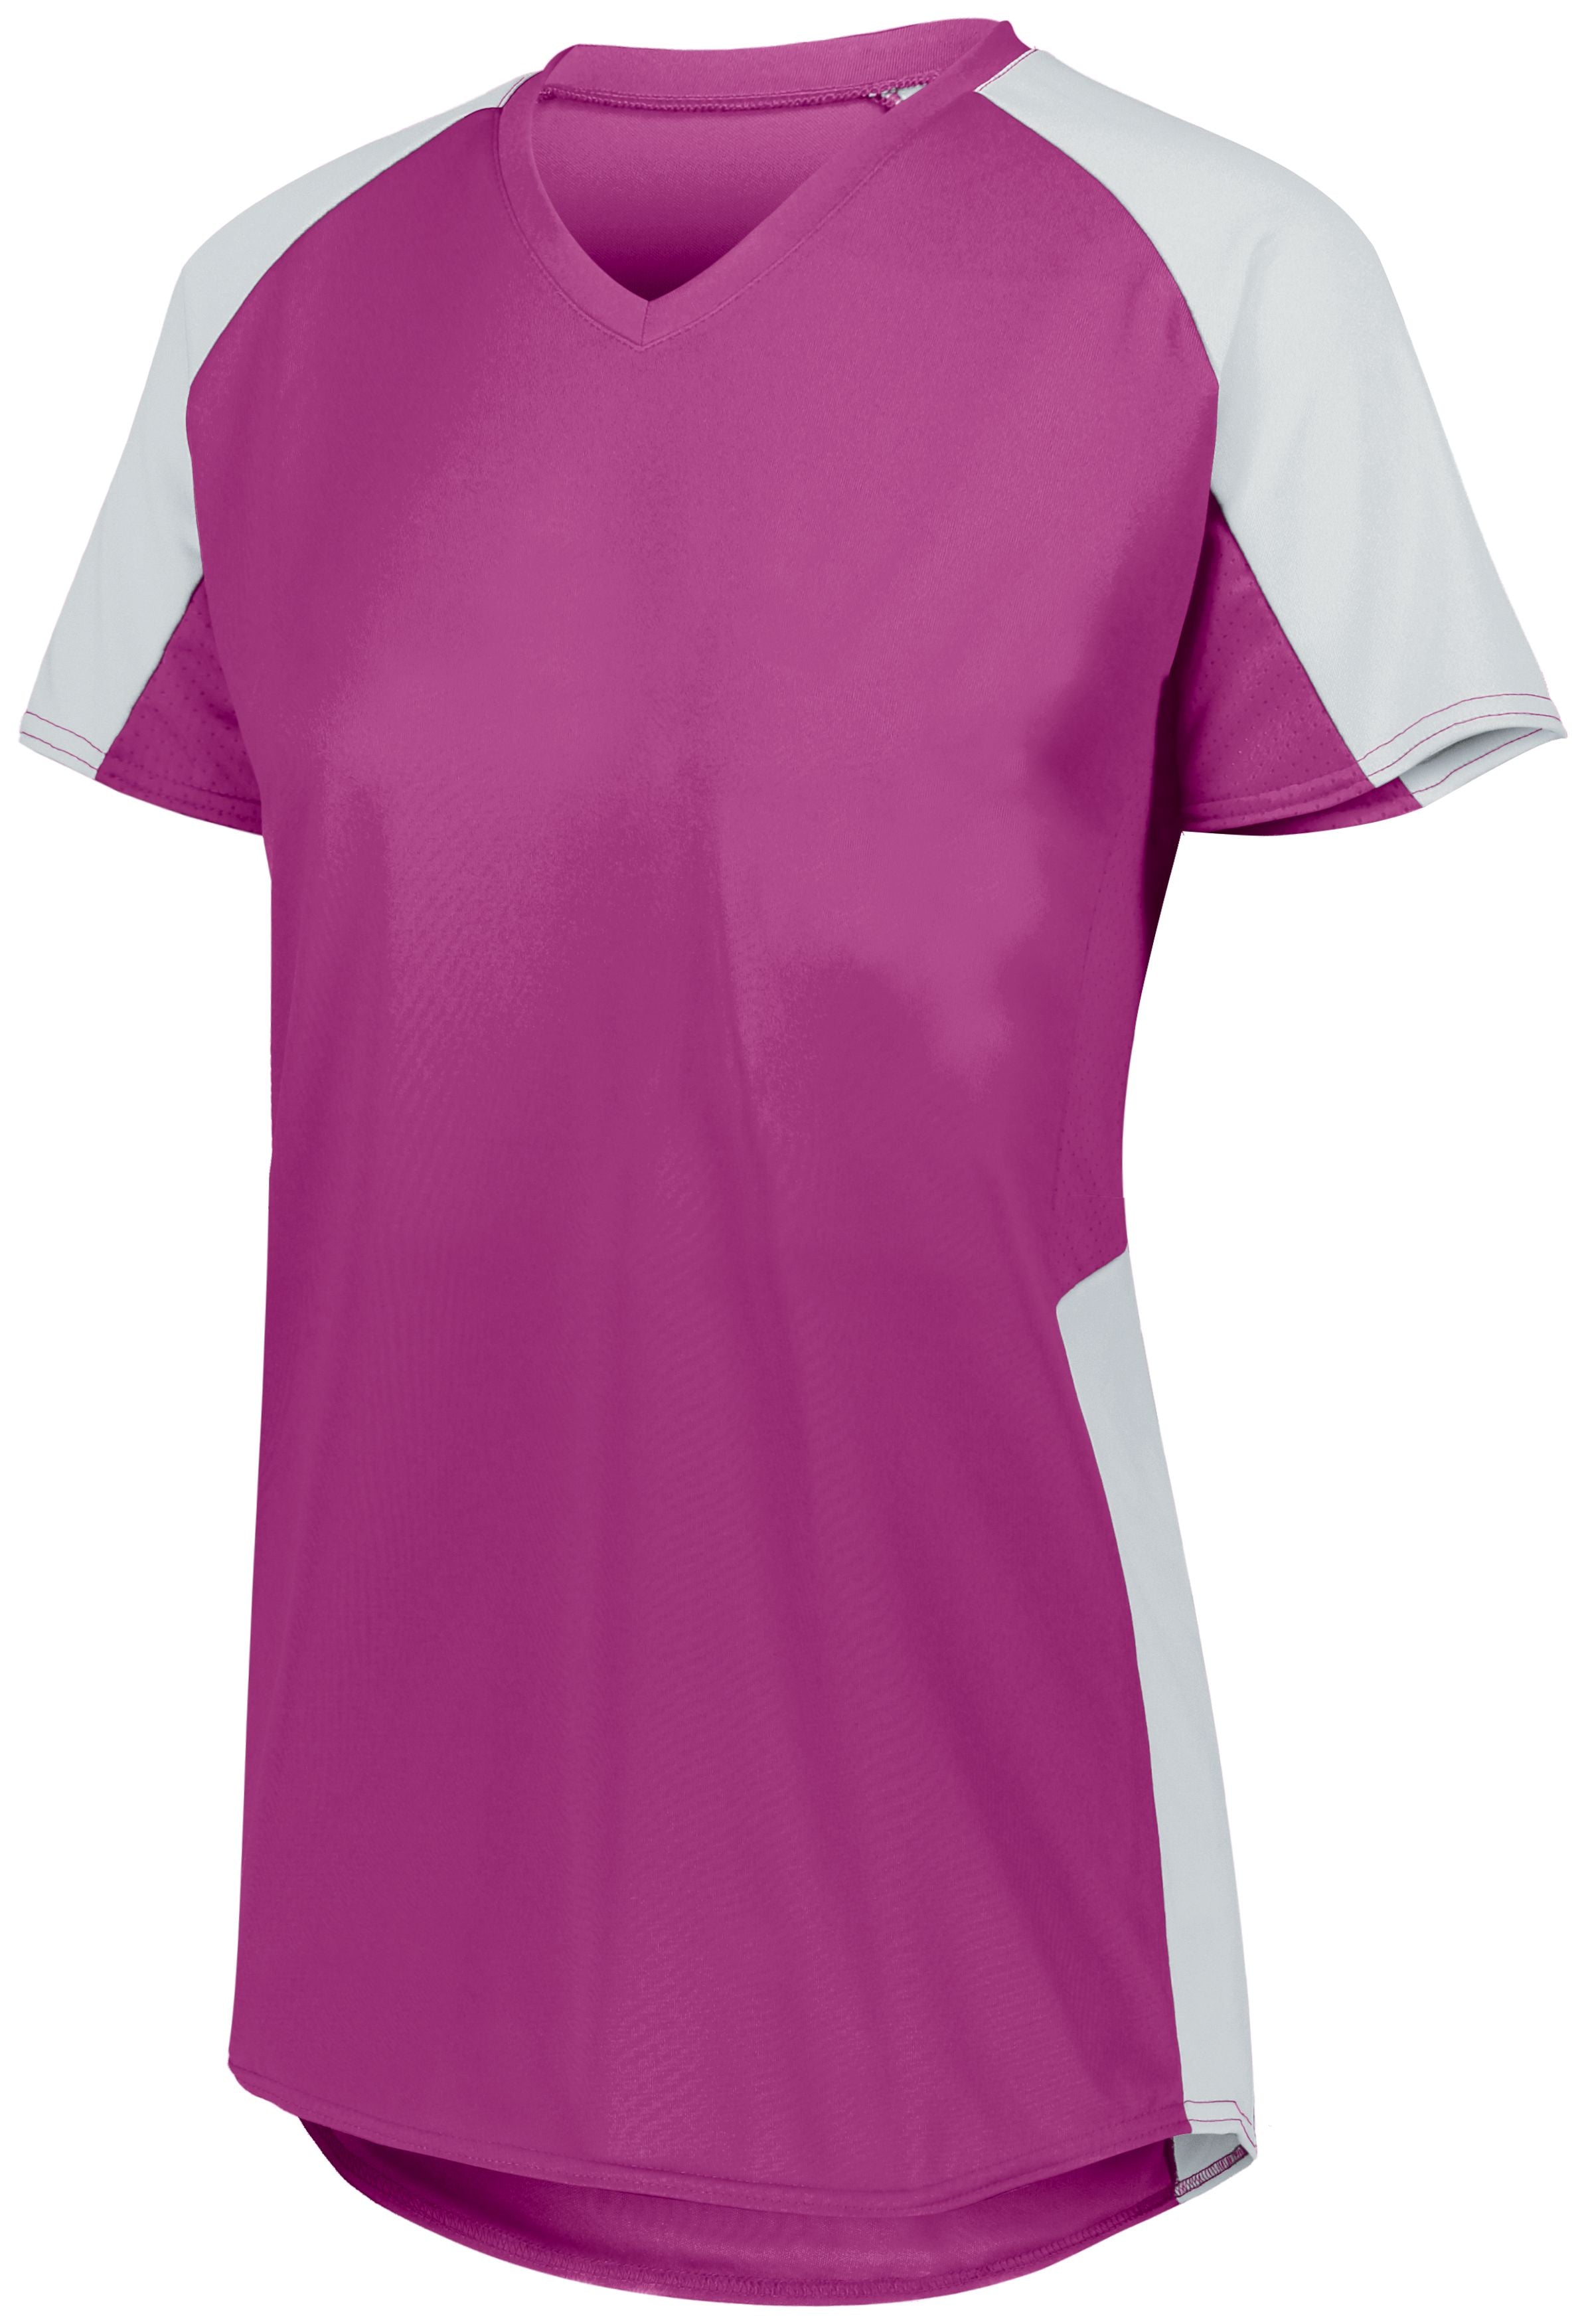 Augusta Sportswear Girls Cutter Jersey in Power Pink/White  -Part of the Girls, Augusta-Products, Softball, Girls-Jersey, Shirts product lines at KanaleyCreations.com